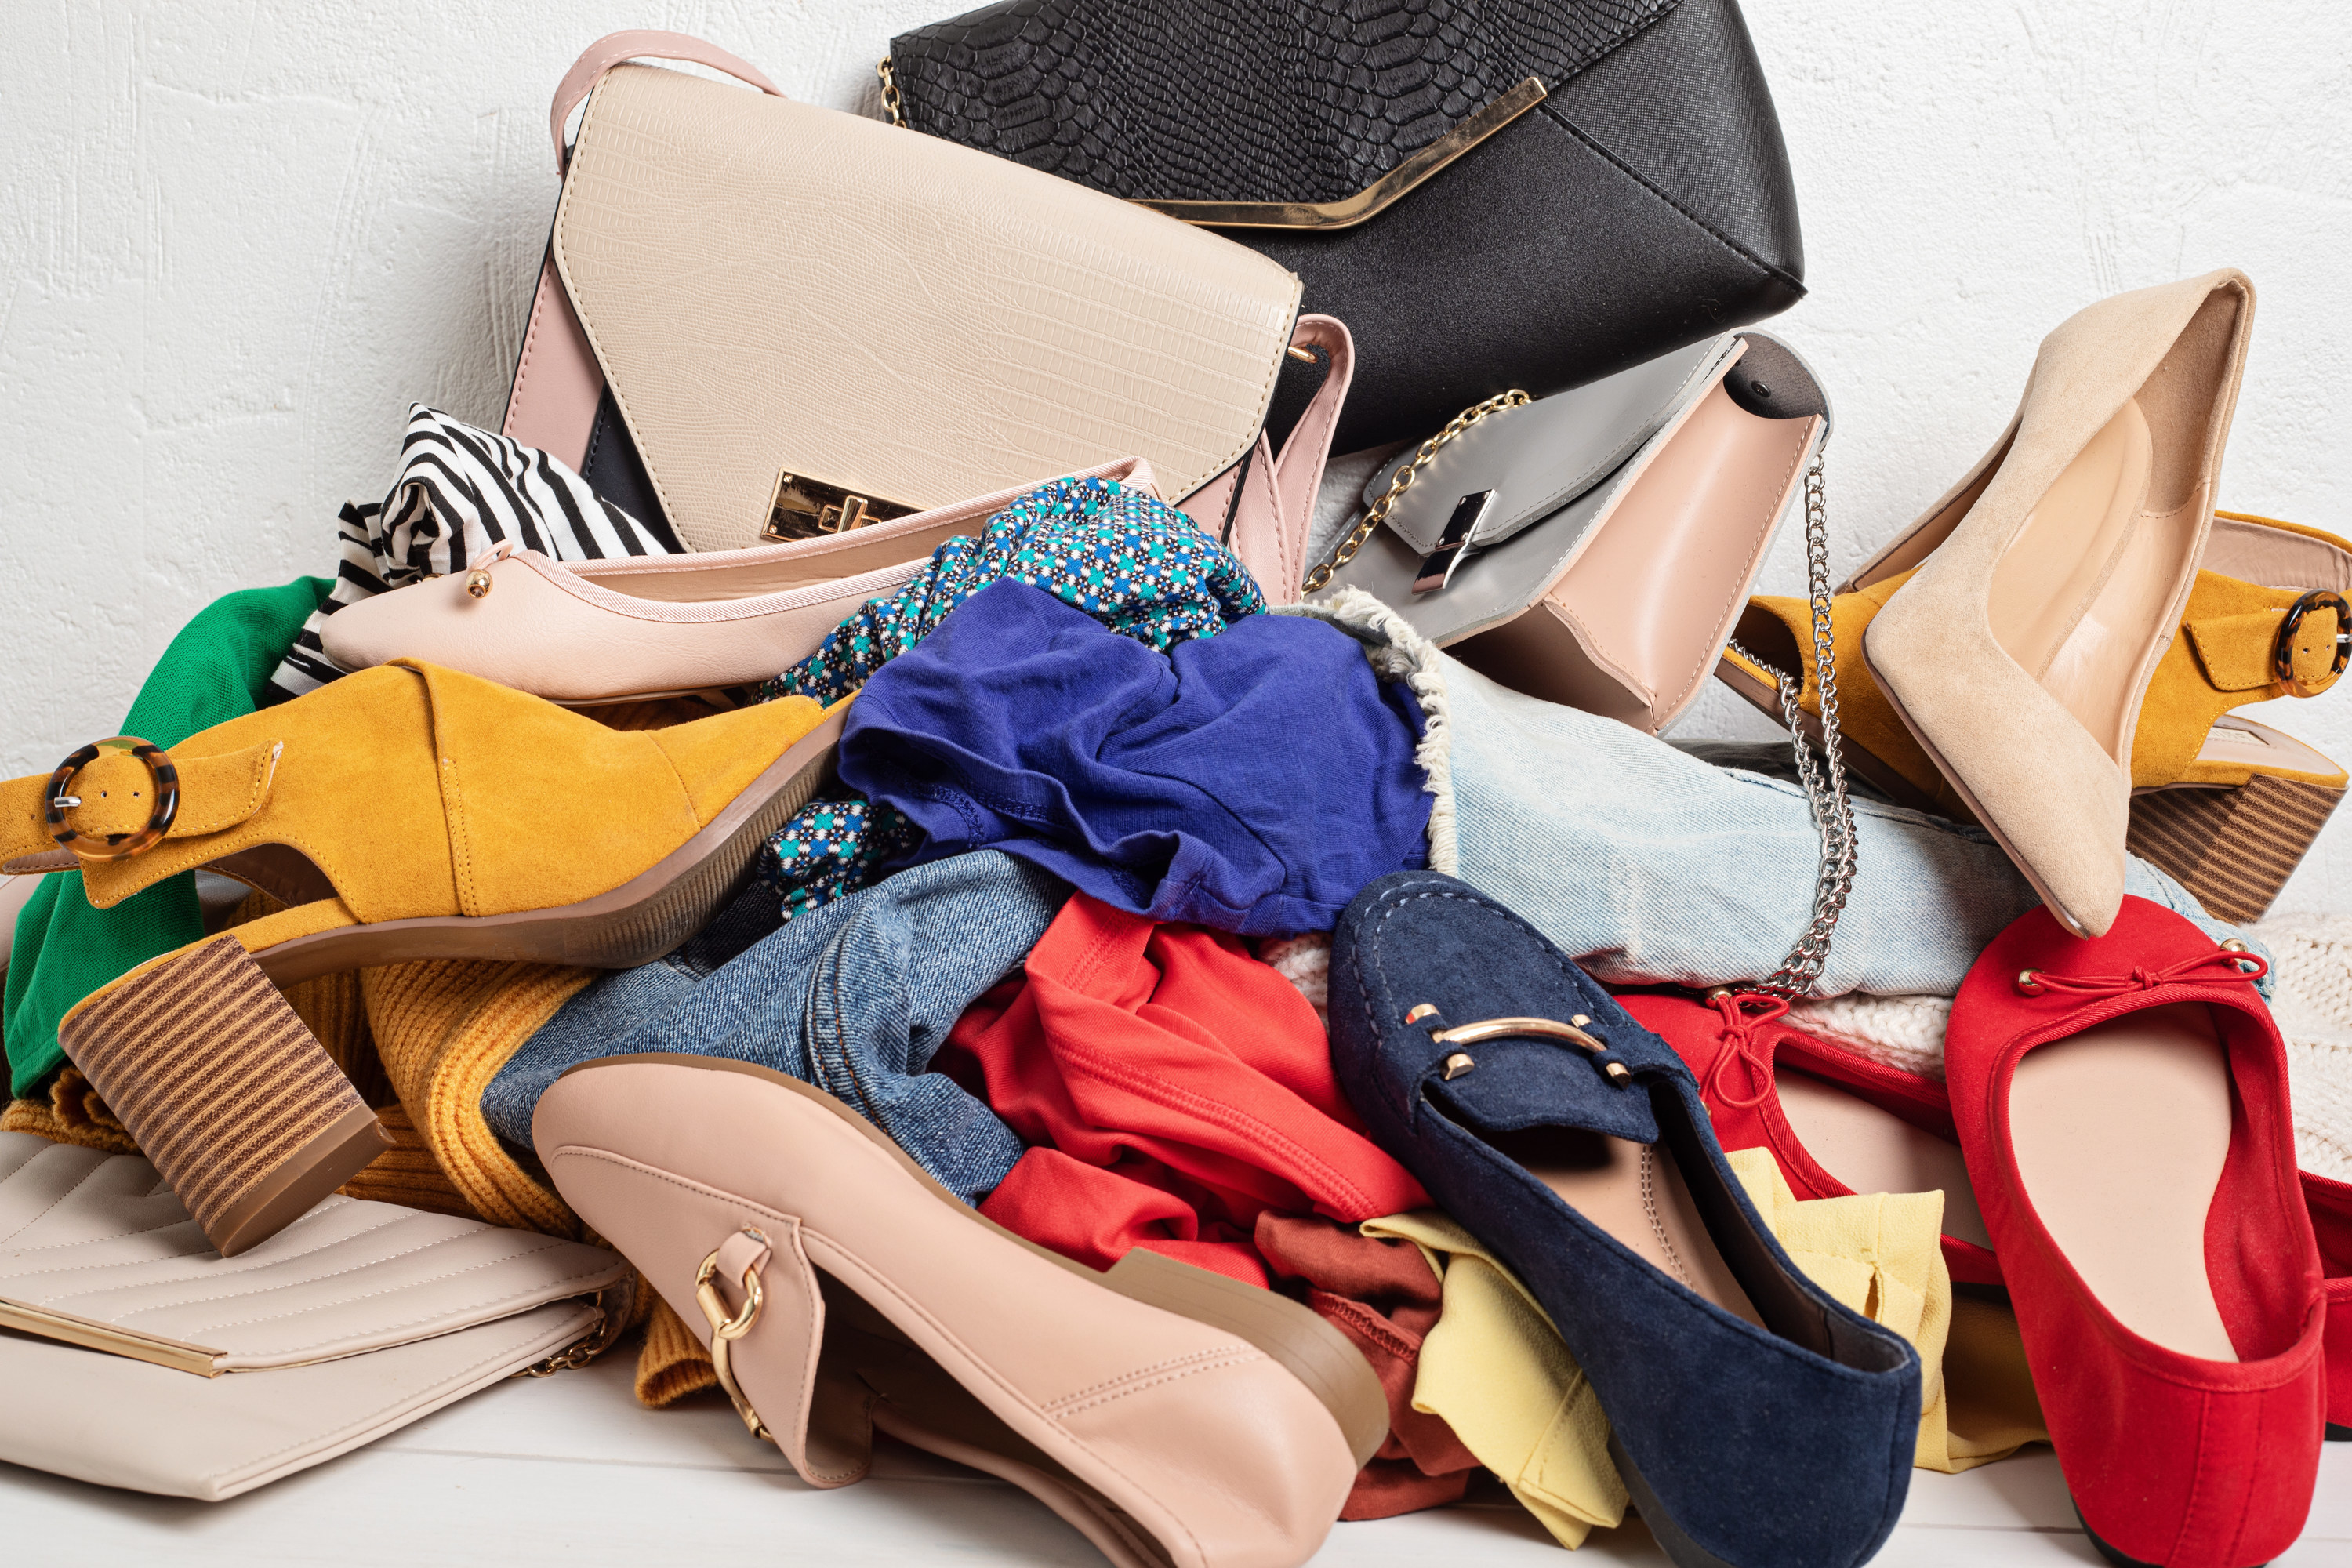 A pile of clothes and shoes on the floor